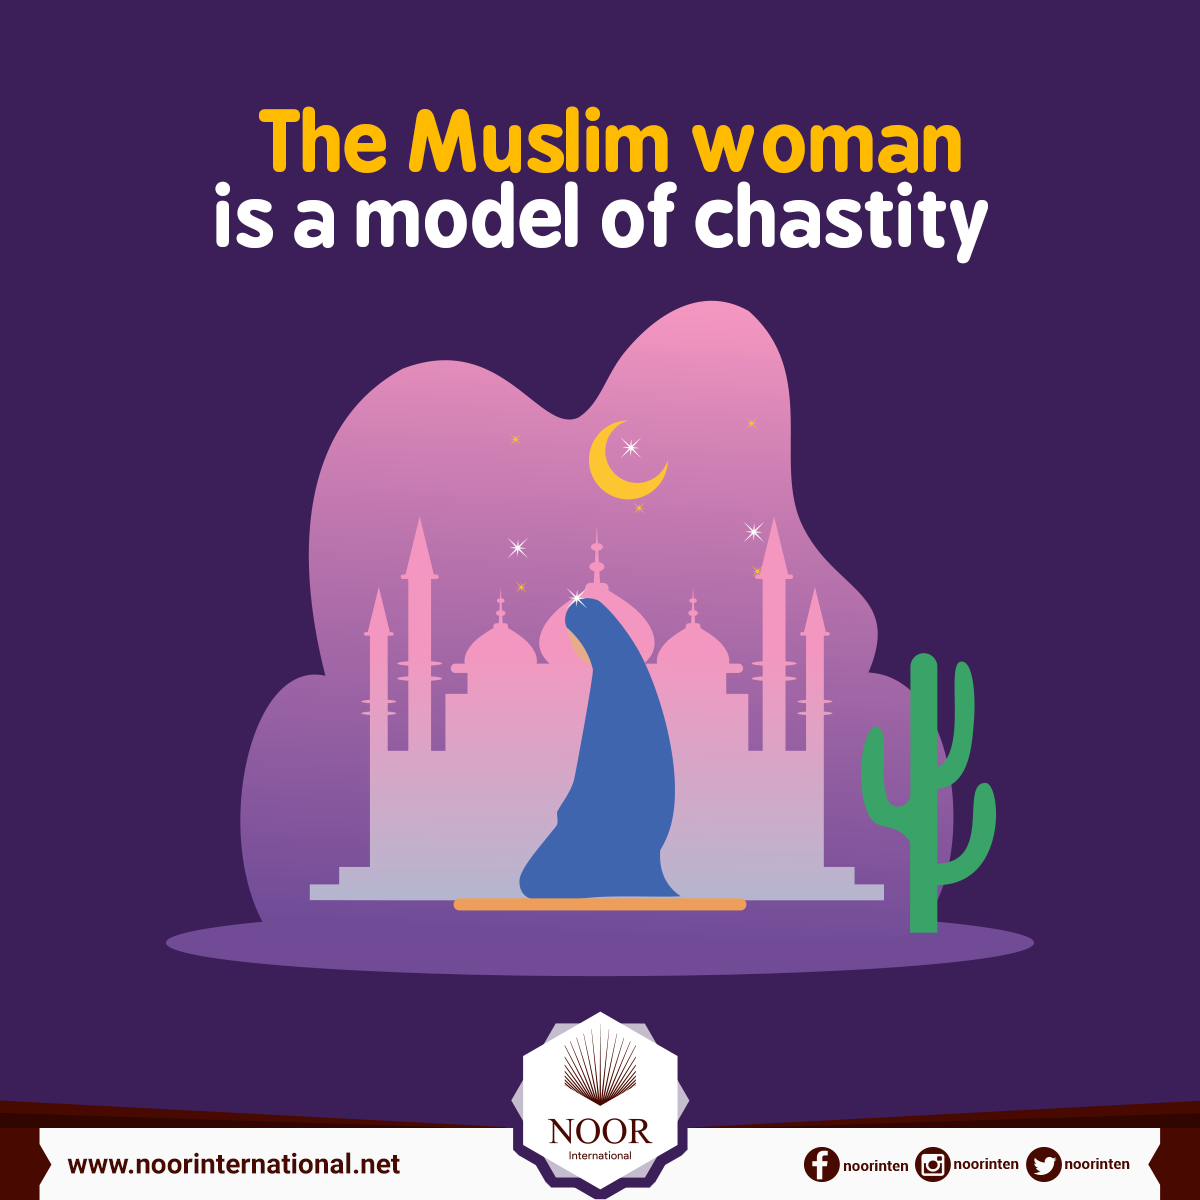 The Muslim woman is a model of chastity